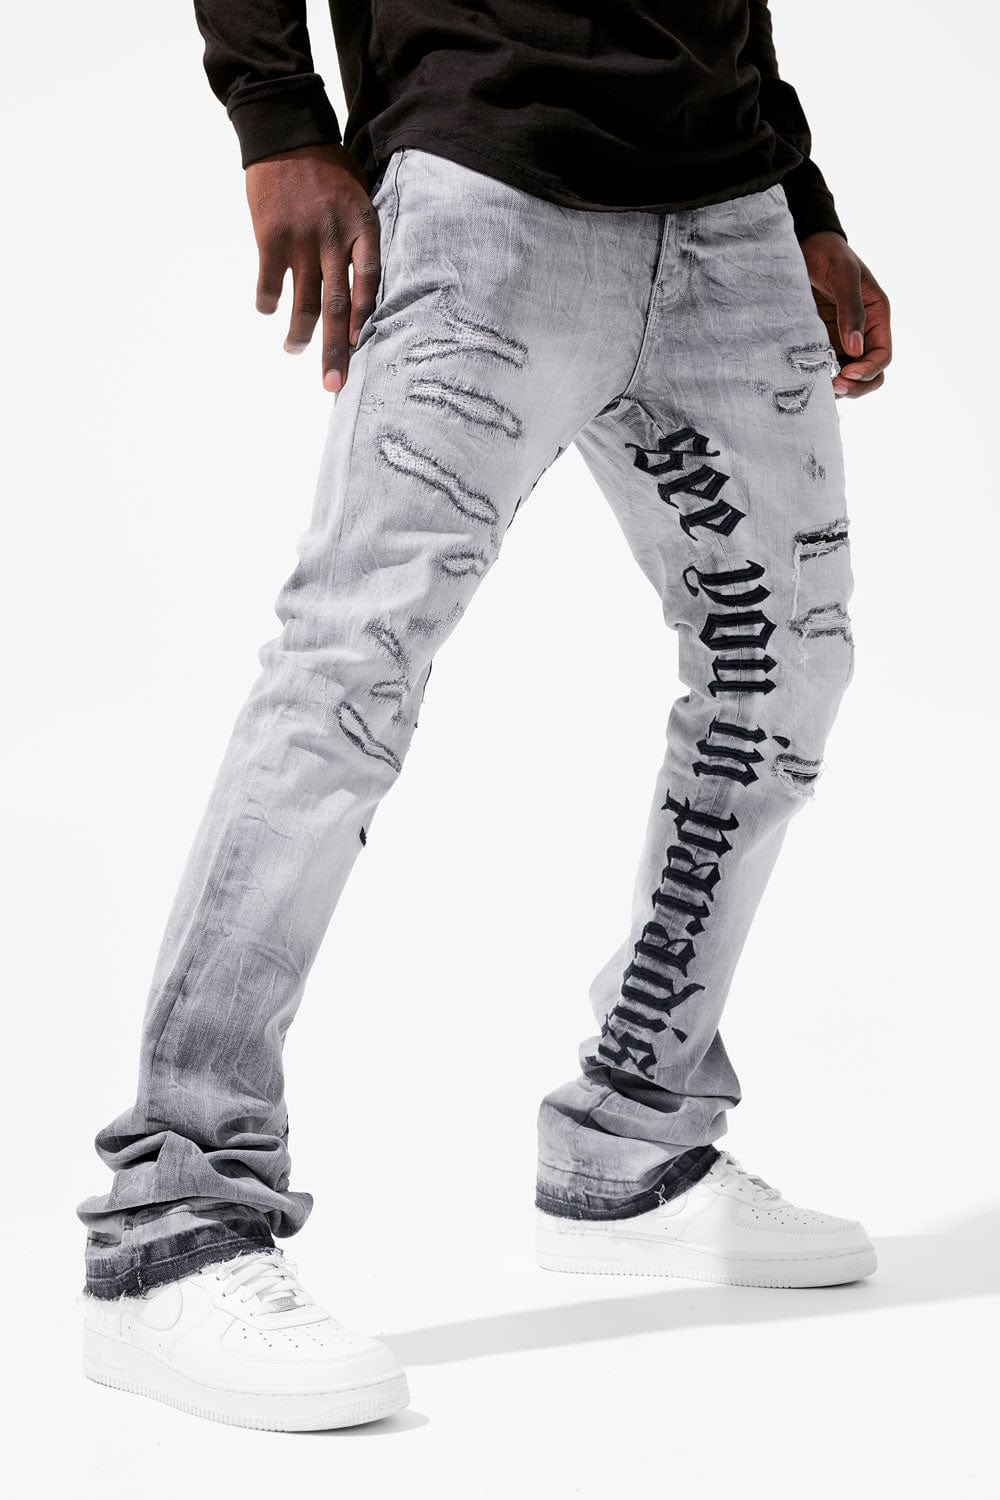 Martin Stacked - See You In Paradise Denim Jeans - Cement